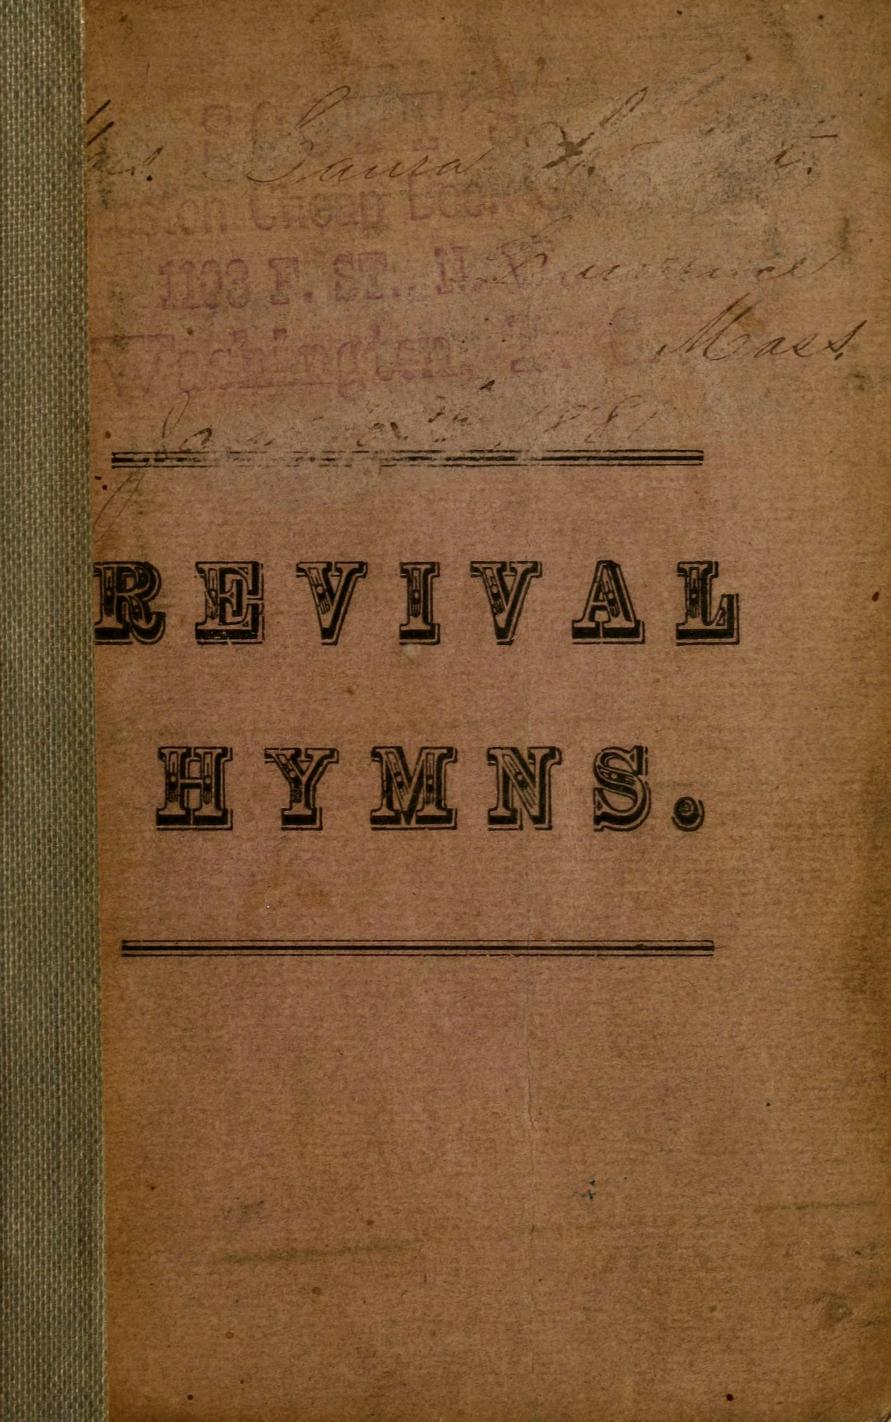 Revival Hymns | Hymnary.org